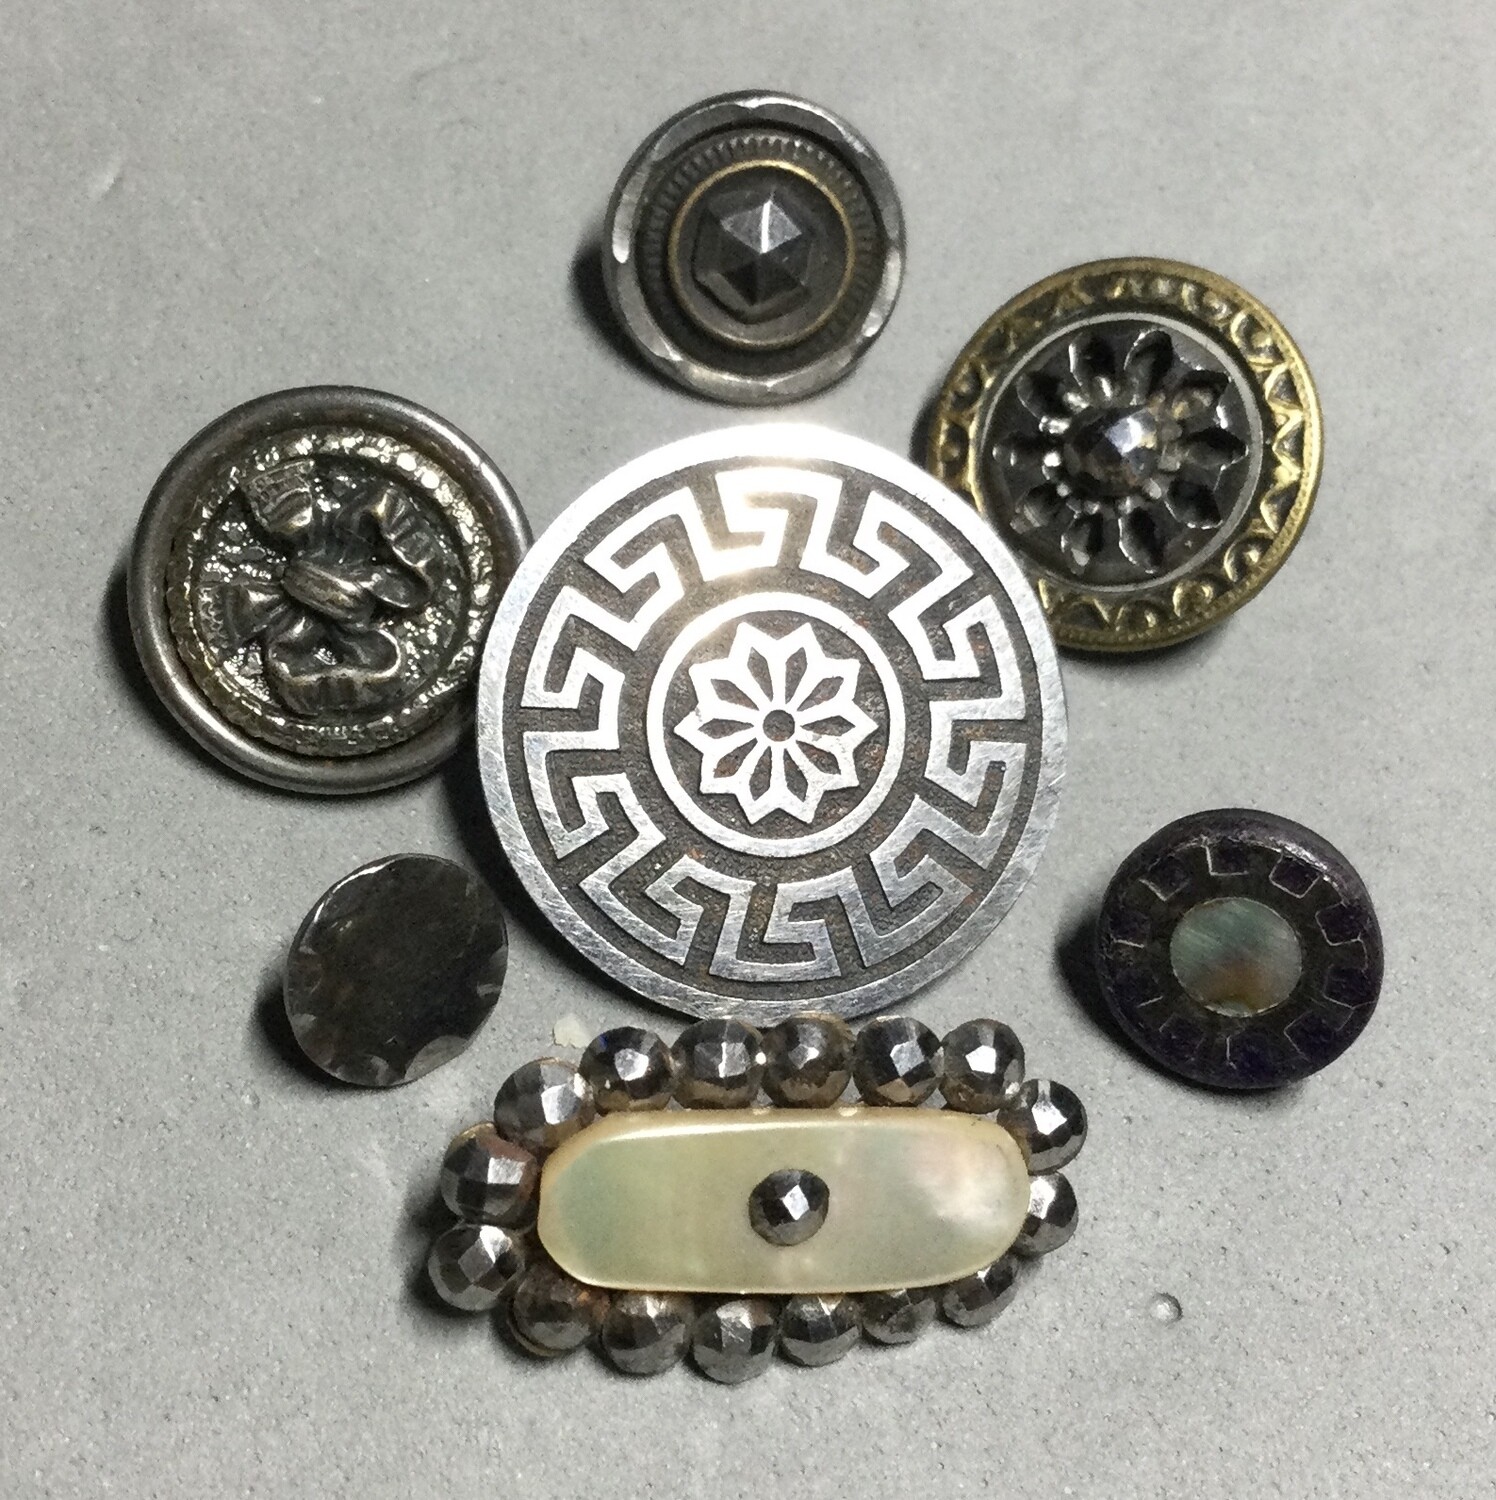 7 BUTTONS WITH STEEL, including DIMI